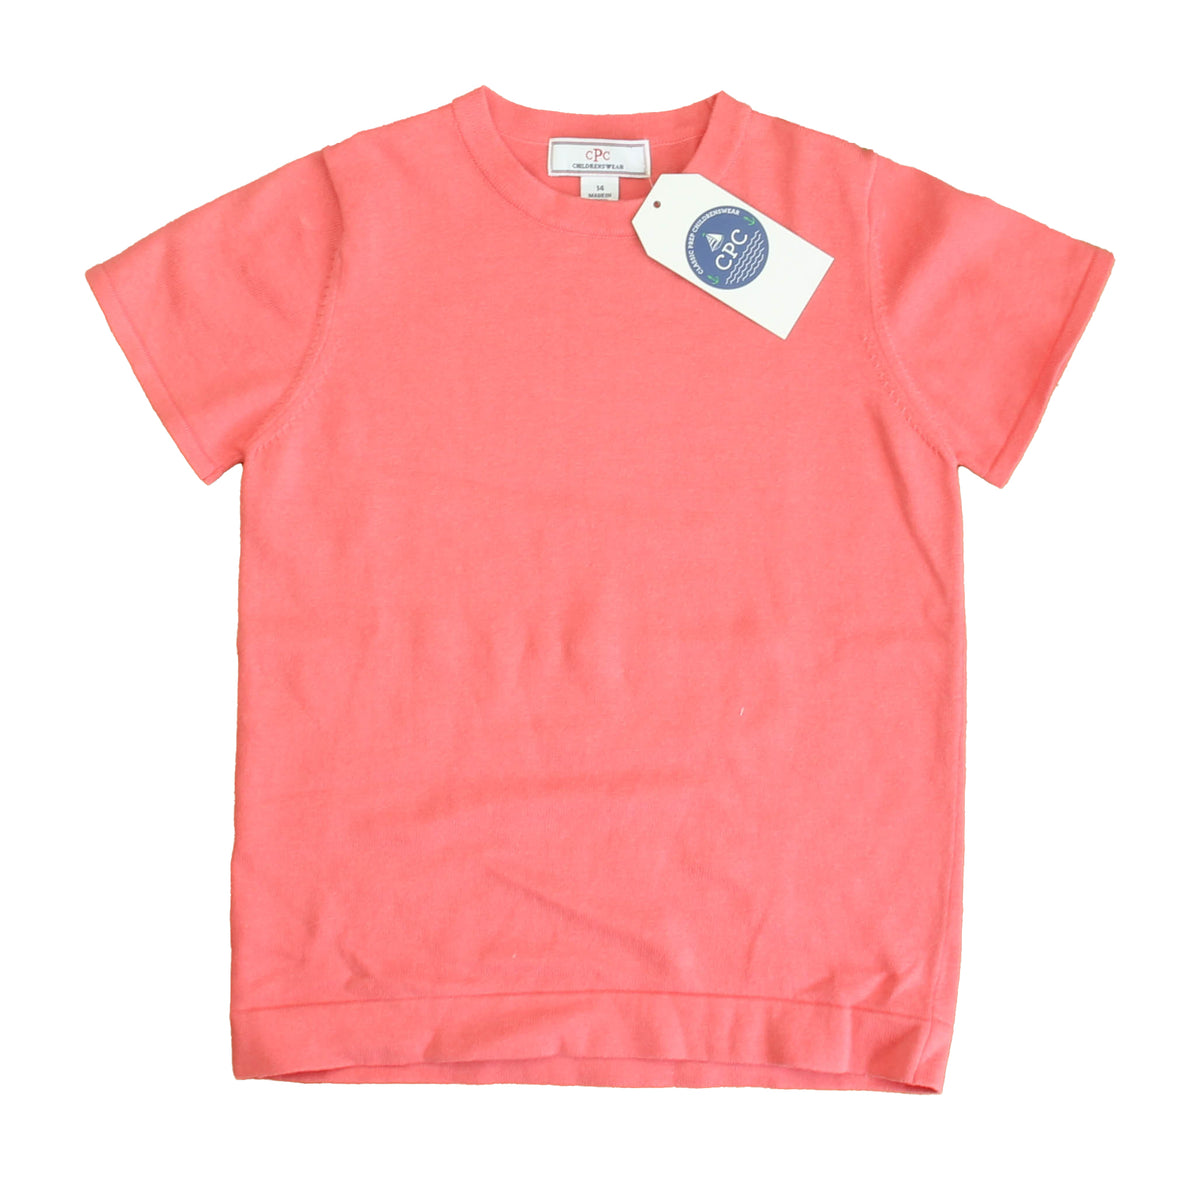 New with Tags: Pink Sweater size: 6-14 Years -- FINAL SALE